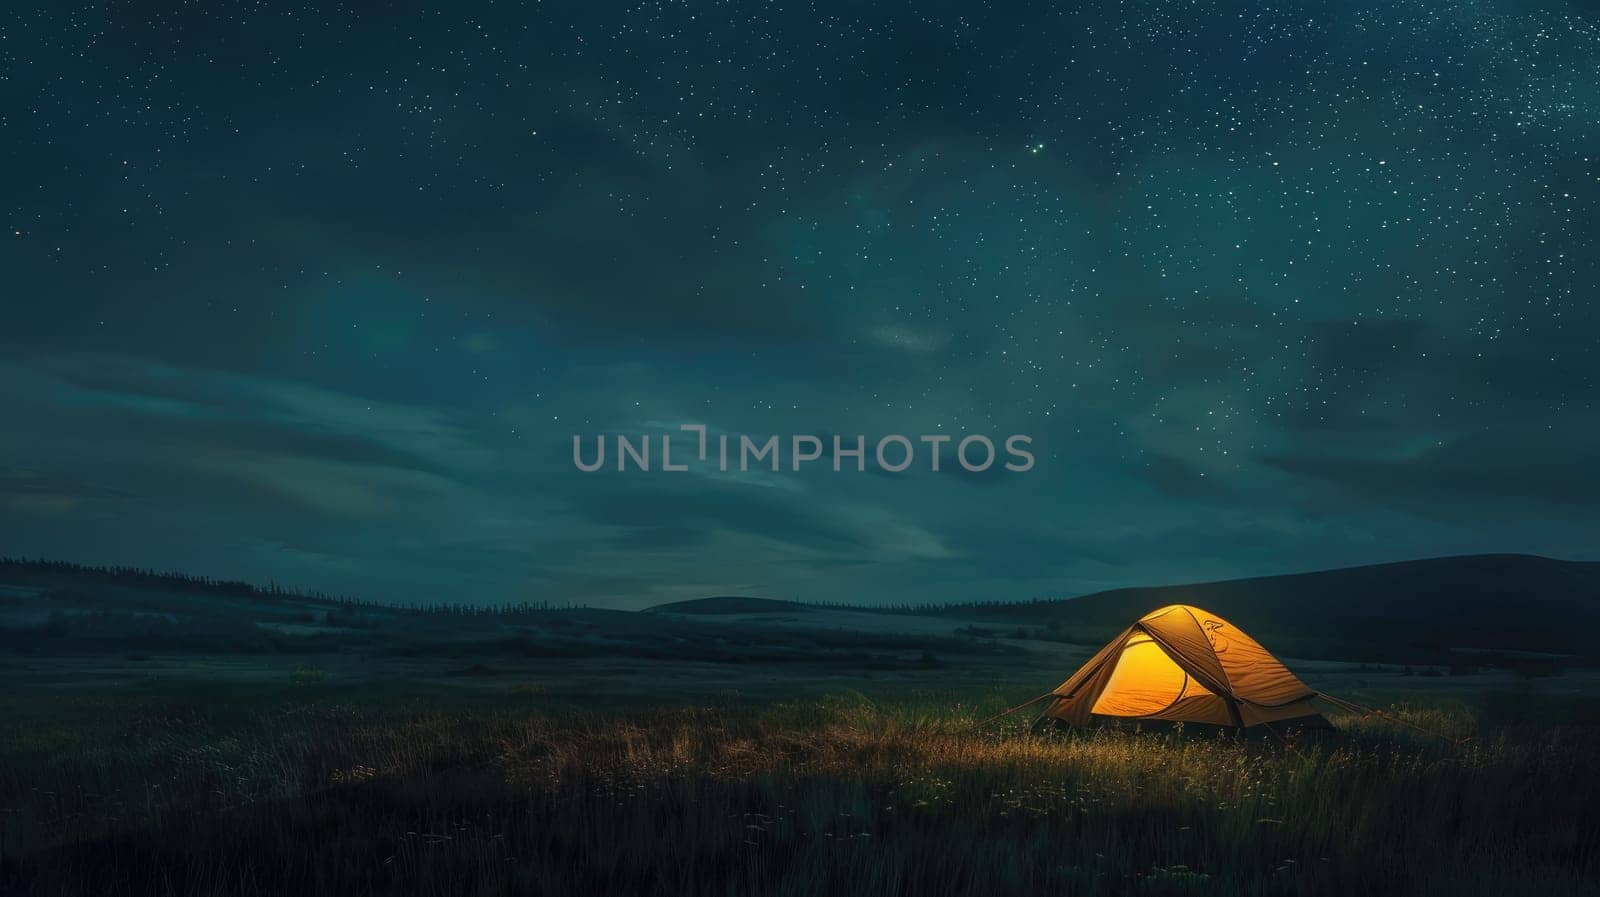 Tent is lit up on the field with a beautiful night sky and stars above by nijieimu